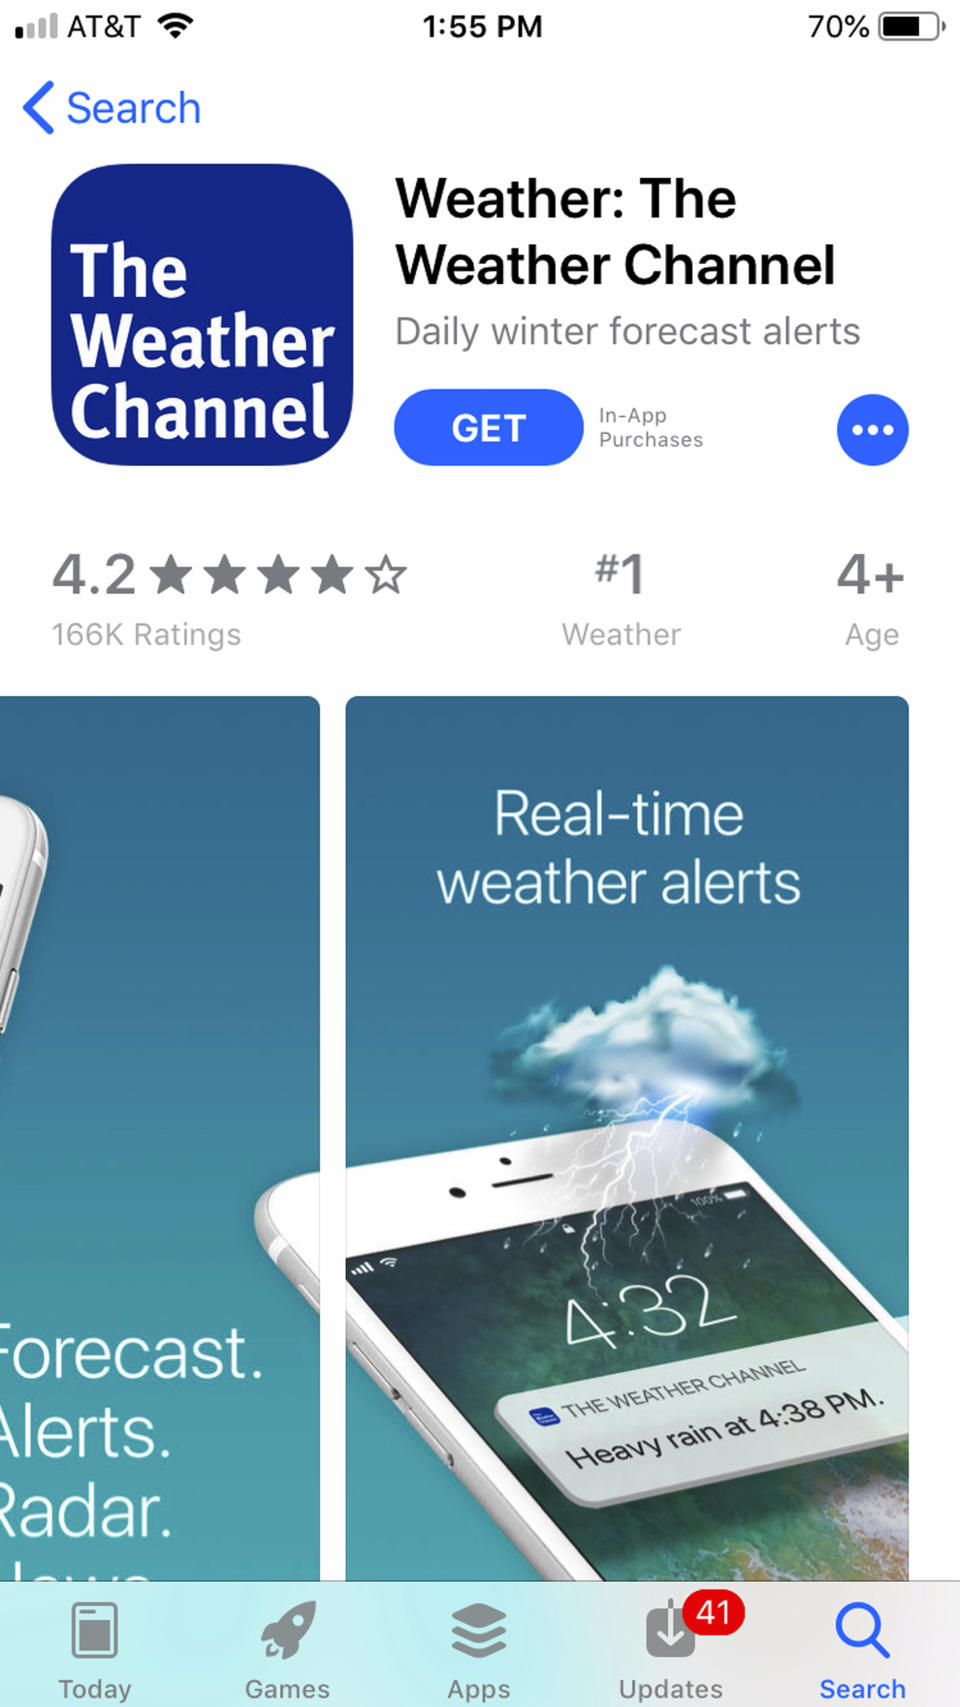 A mobile phone with The Weather Channel app is seen Friday, Jan. 4, 2019. Los Angeles City Attorney Michael Feuer said Friday that owners of The Weather Channel app, one of the most popular mobile weather apps, used it to track people's every step and profit off that information. Feuer said the company misled users of the popular app to think their location data will only be used for personalized forecasts and alerts. A spokesman for app owner IBM Corp. says it's been clear about the use of location data and will vigorously defend its "fully appropriate" disclosures. (AP Photo/Brian Melley)